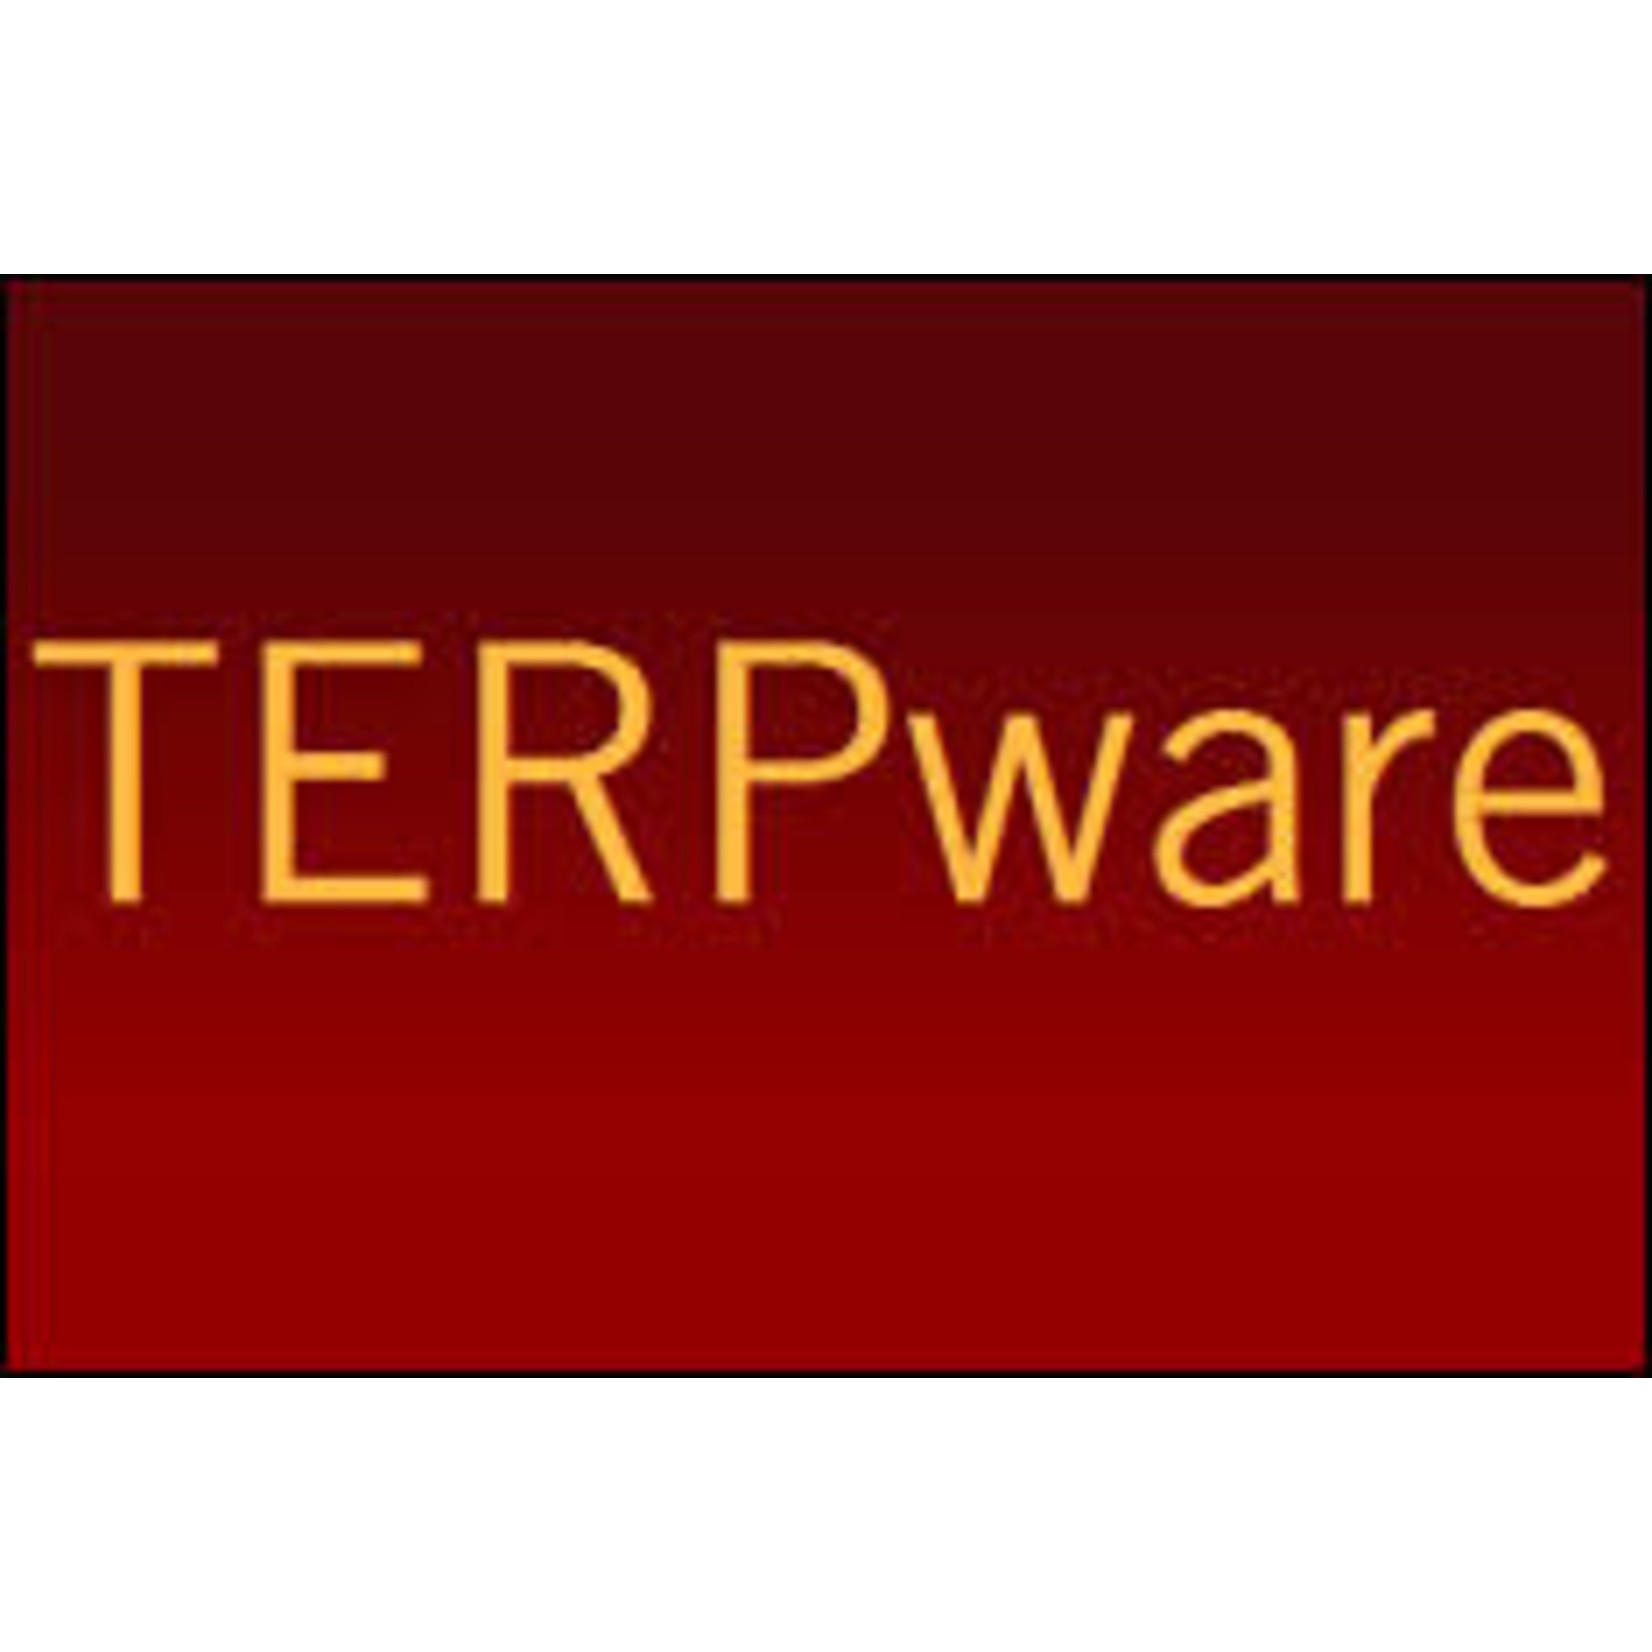 Software SPSS Student - July 2021 to June 2022 - TERPware Access